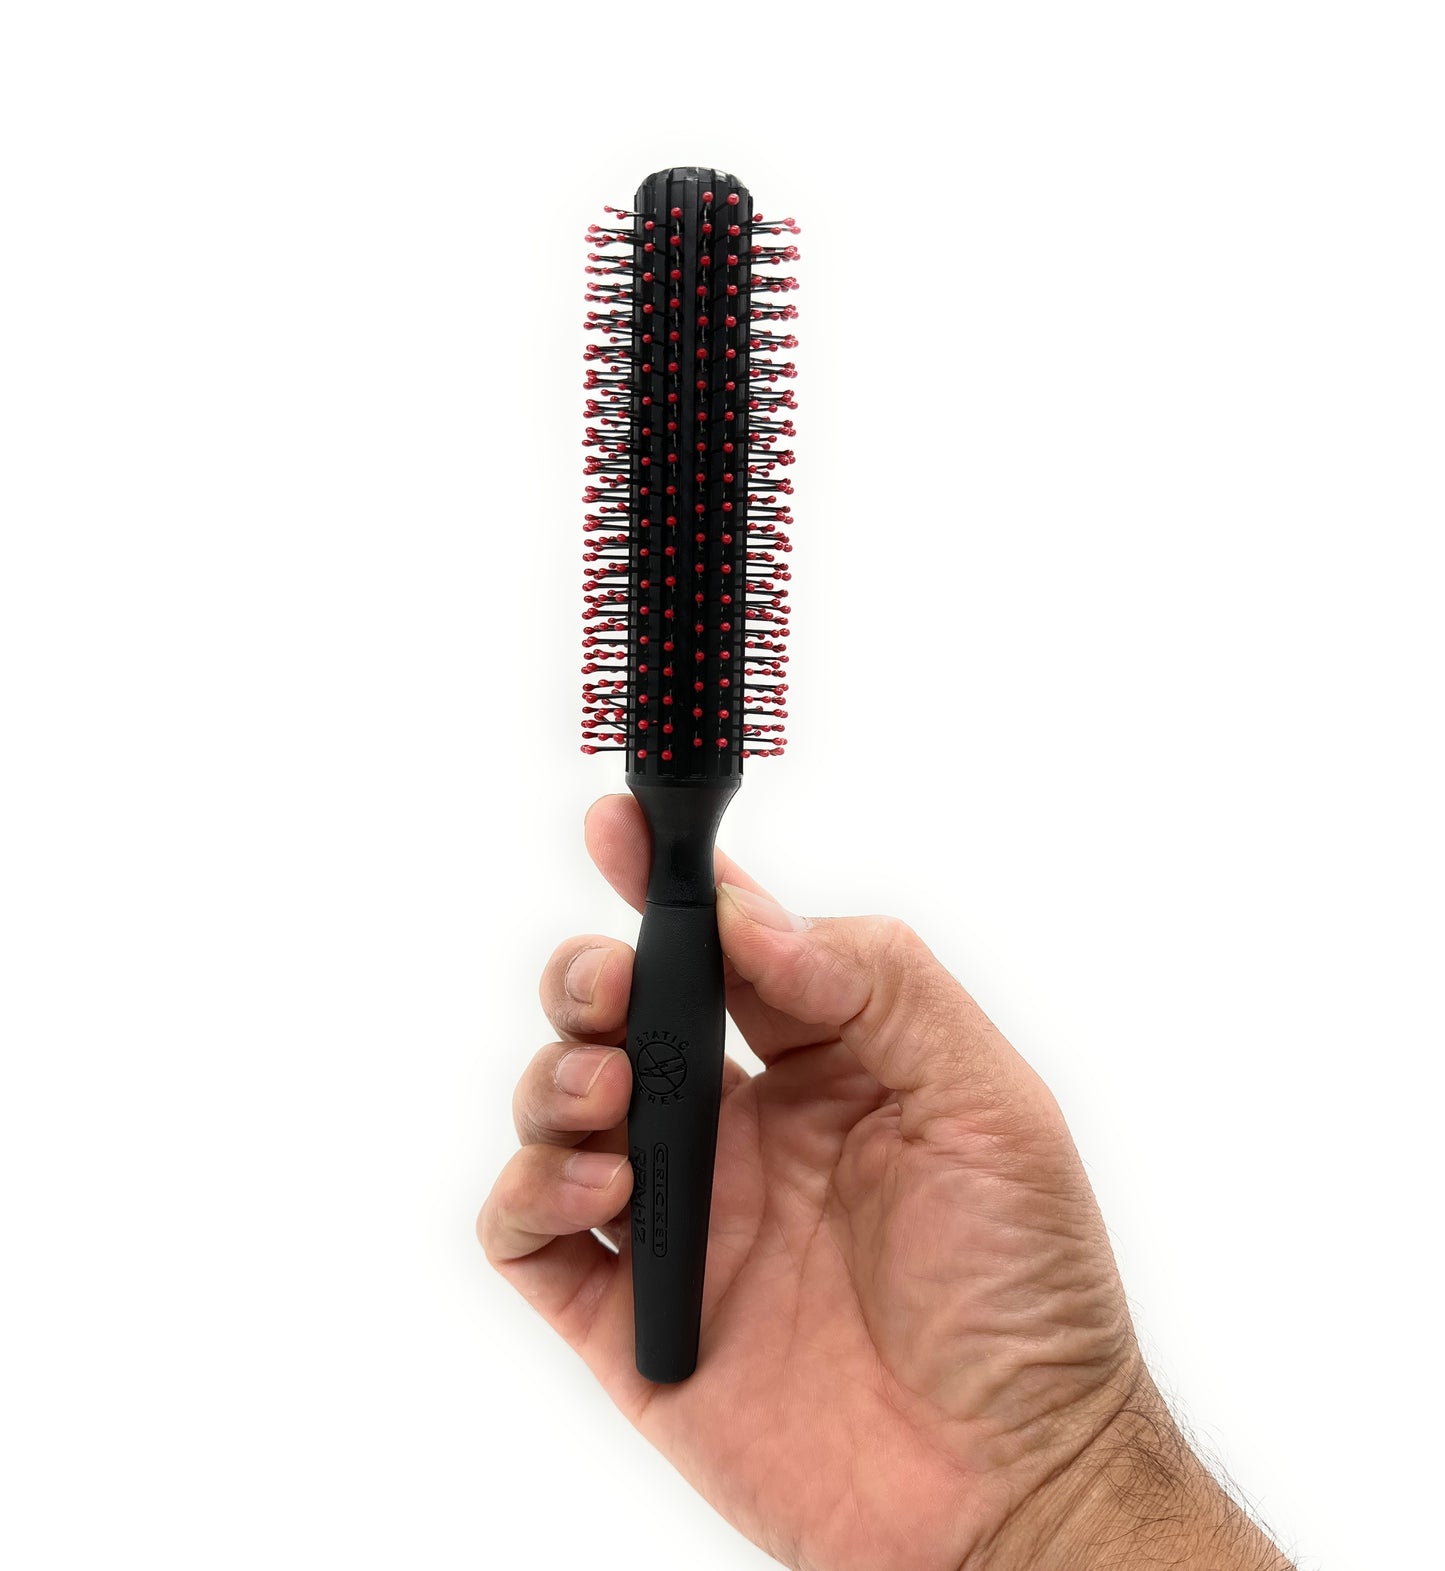 Cricket Hair Brush - RPM 12 Row For Hair Types Effortless Curling, Blow Drying, Styling